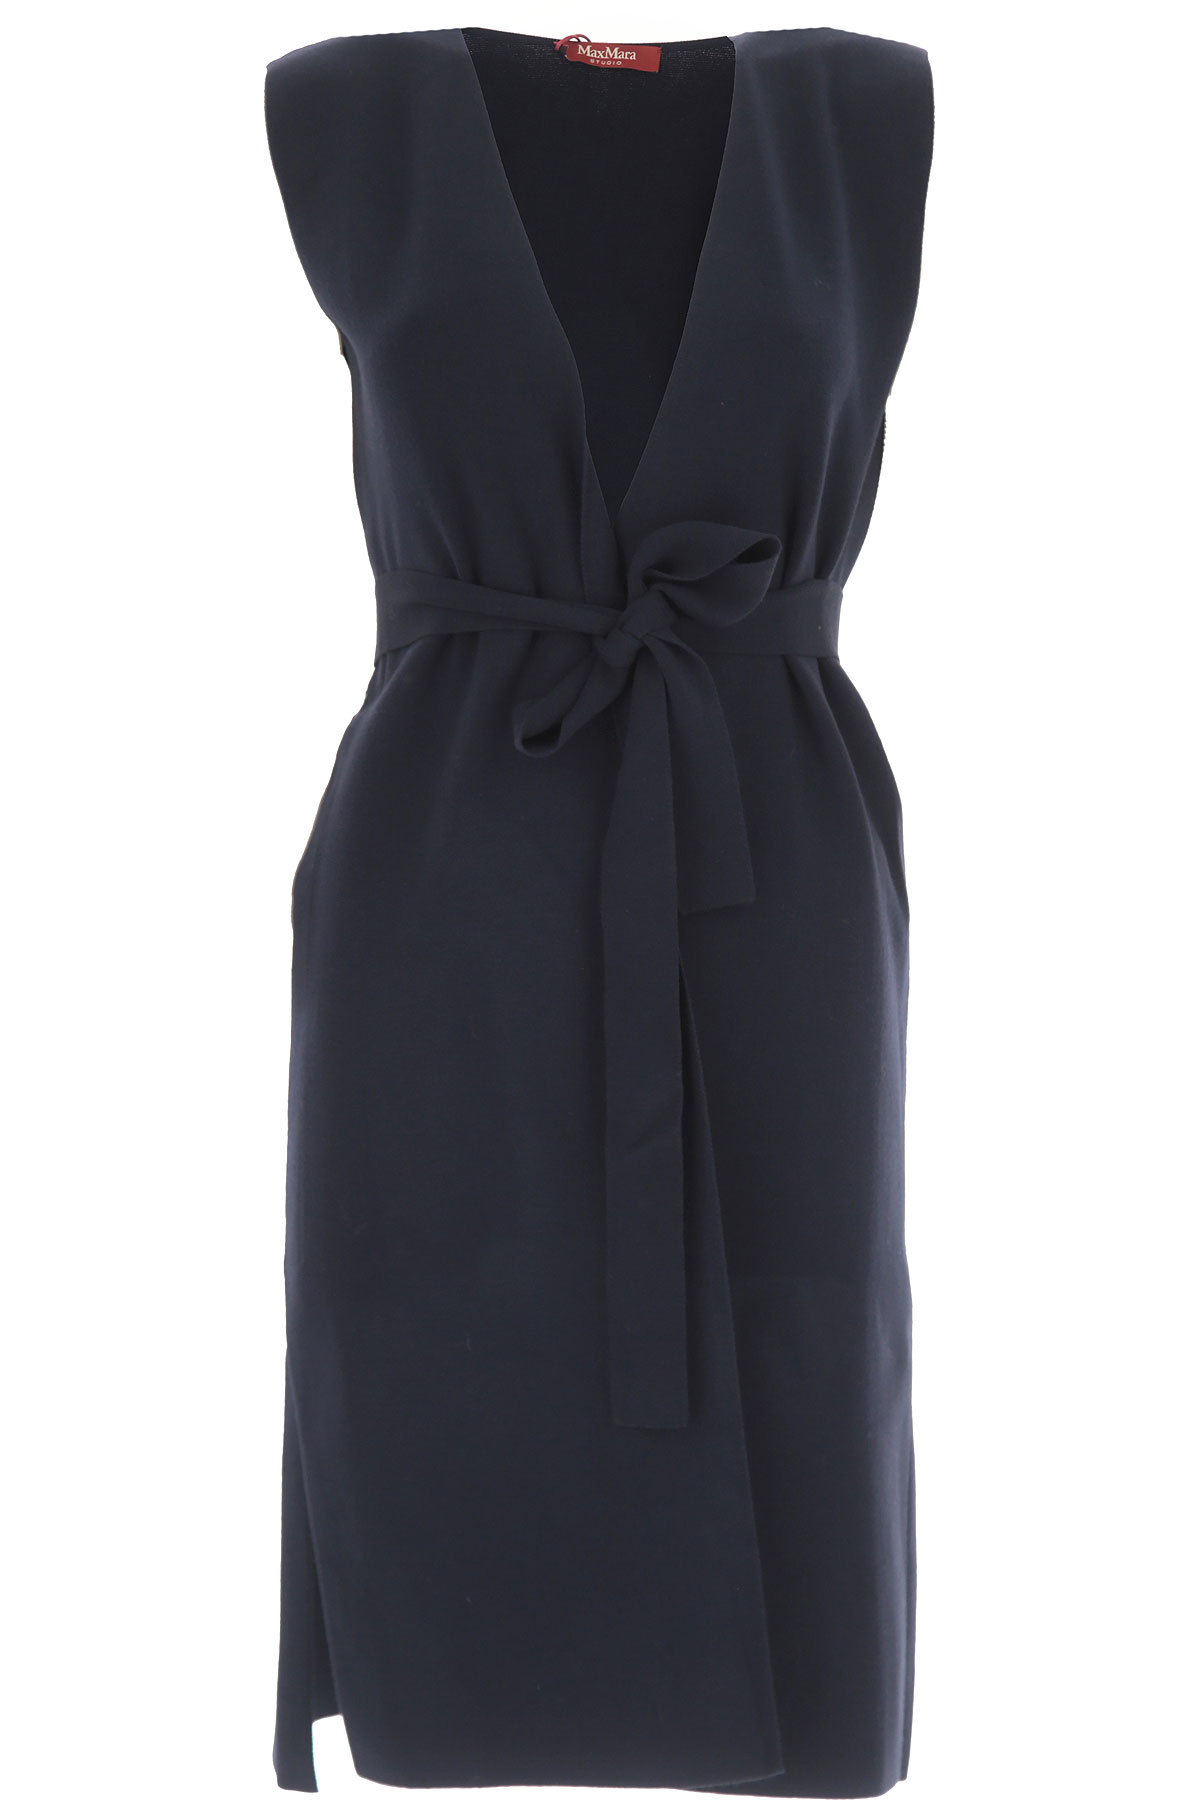 Max Mara Dress for Women, Evening Cocktail Party On Sale, navy, viscosa,  2021, 4 6 on Raffaello Network | AccuWeather Shop